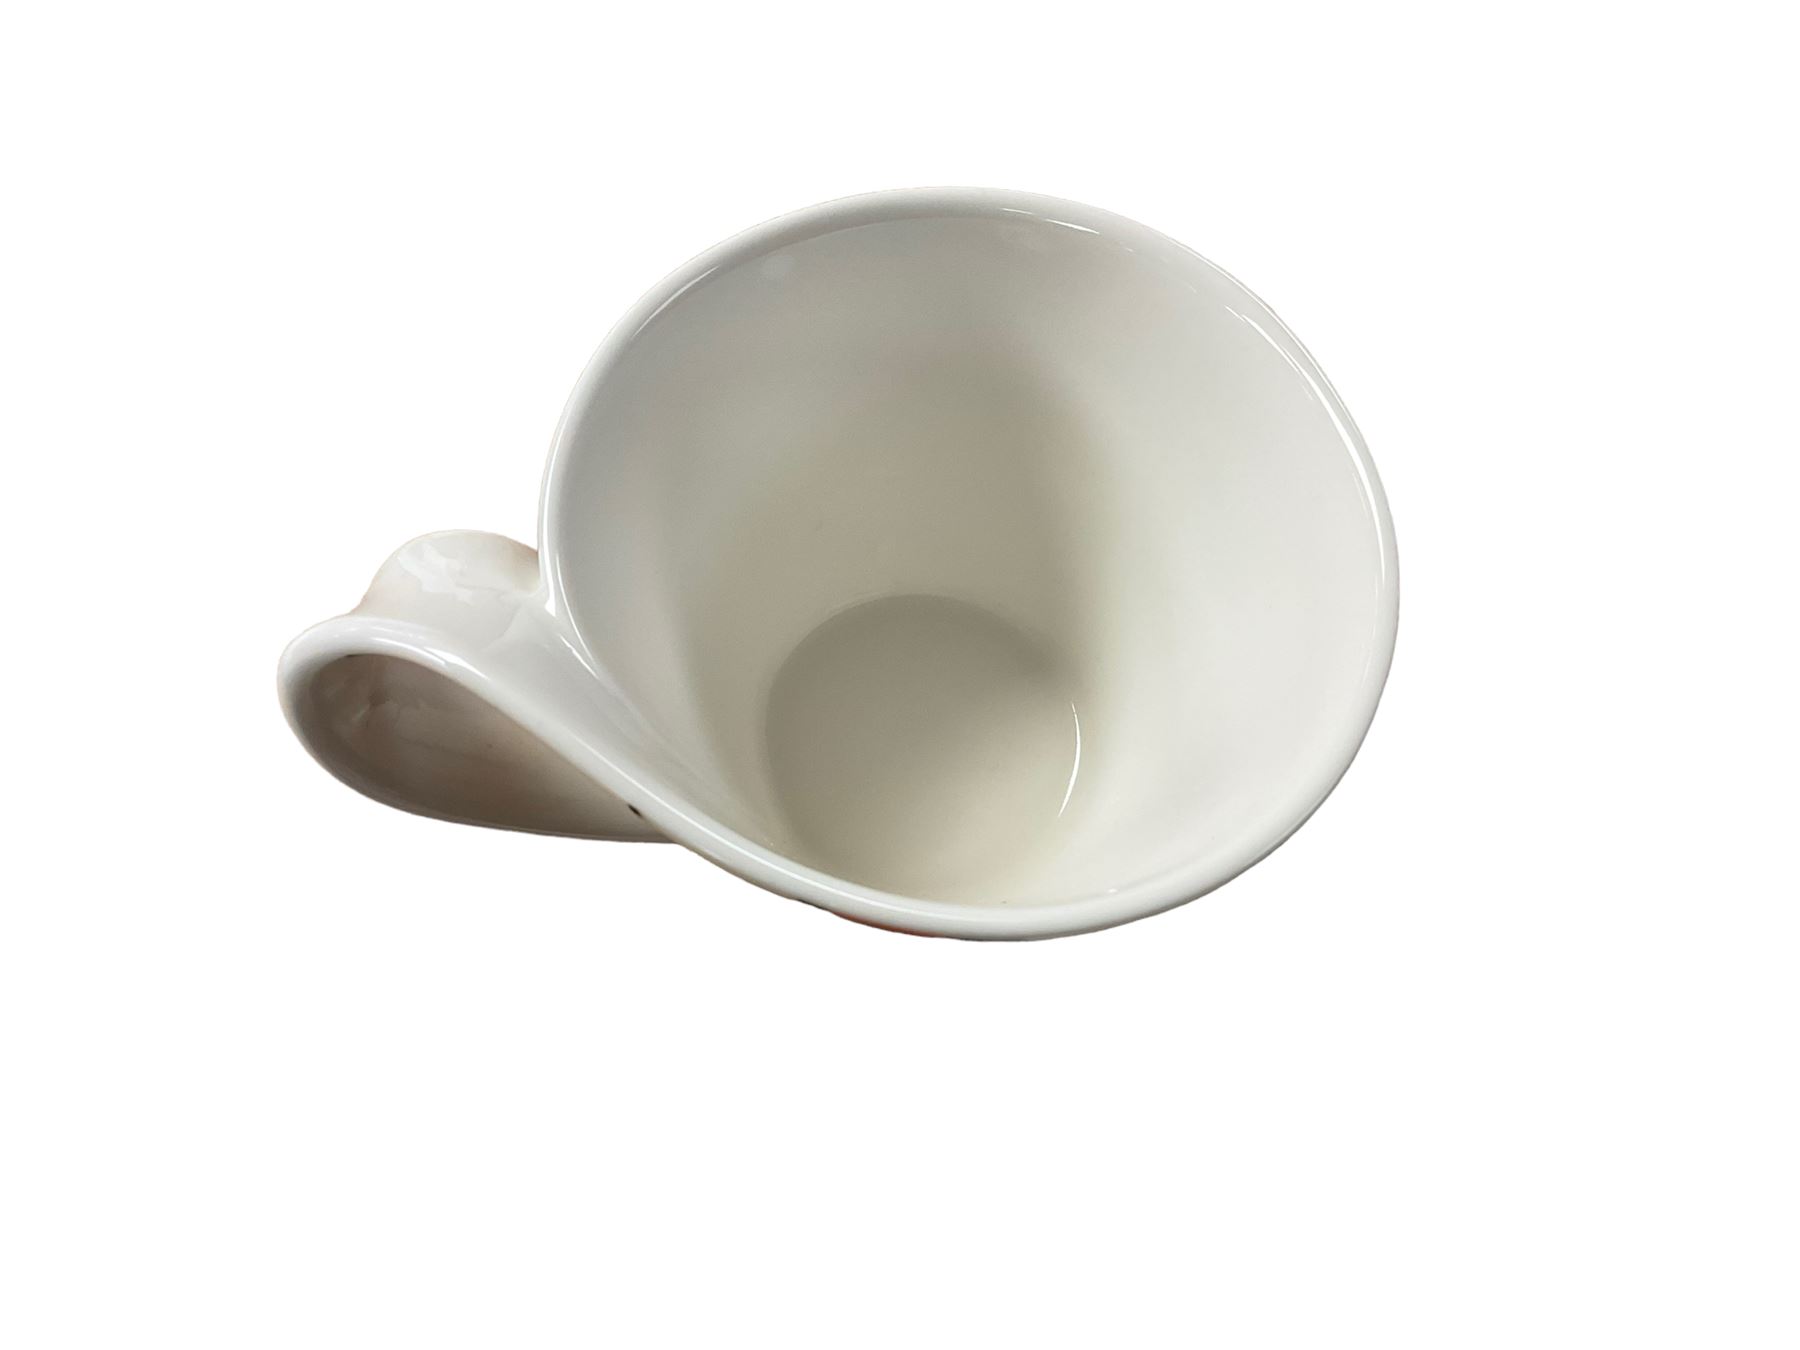 Villeroy & Boch wave cup and saucer - Image 4 of 4